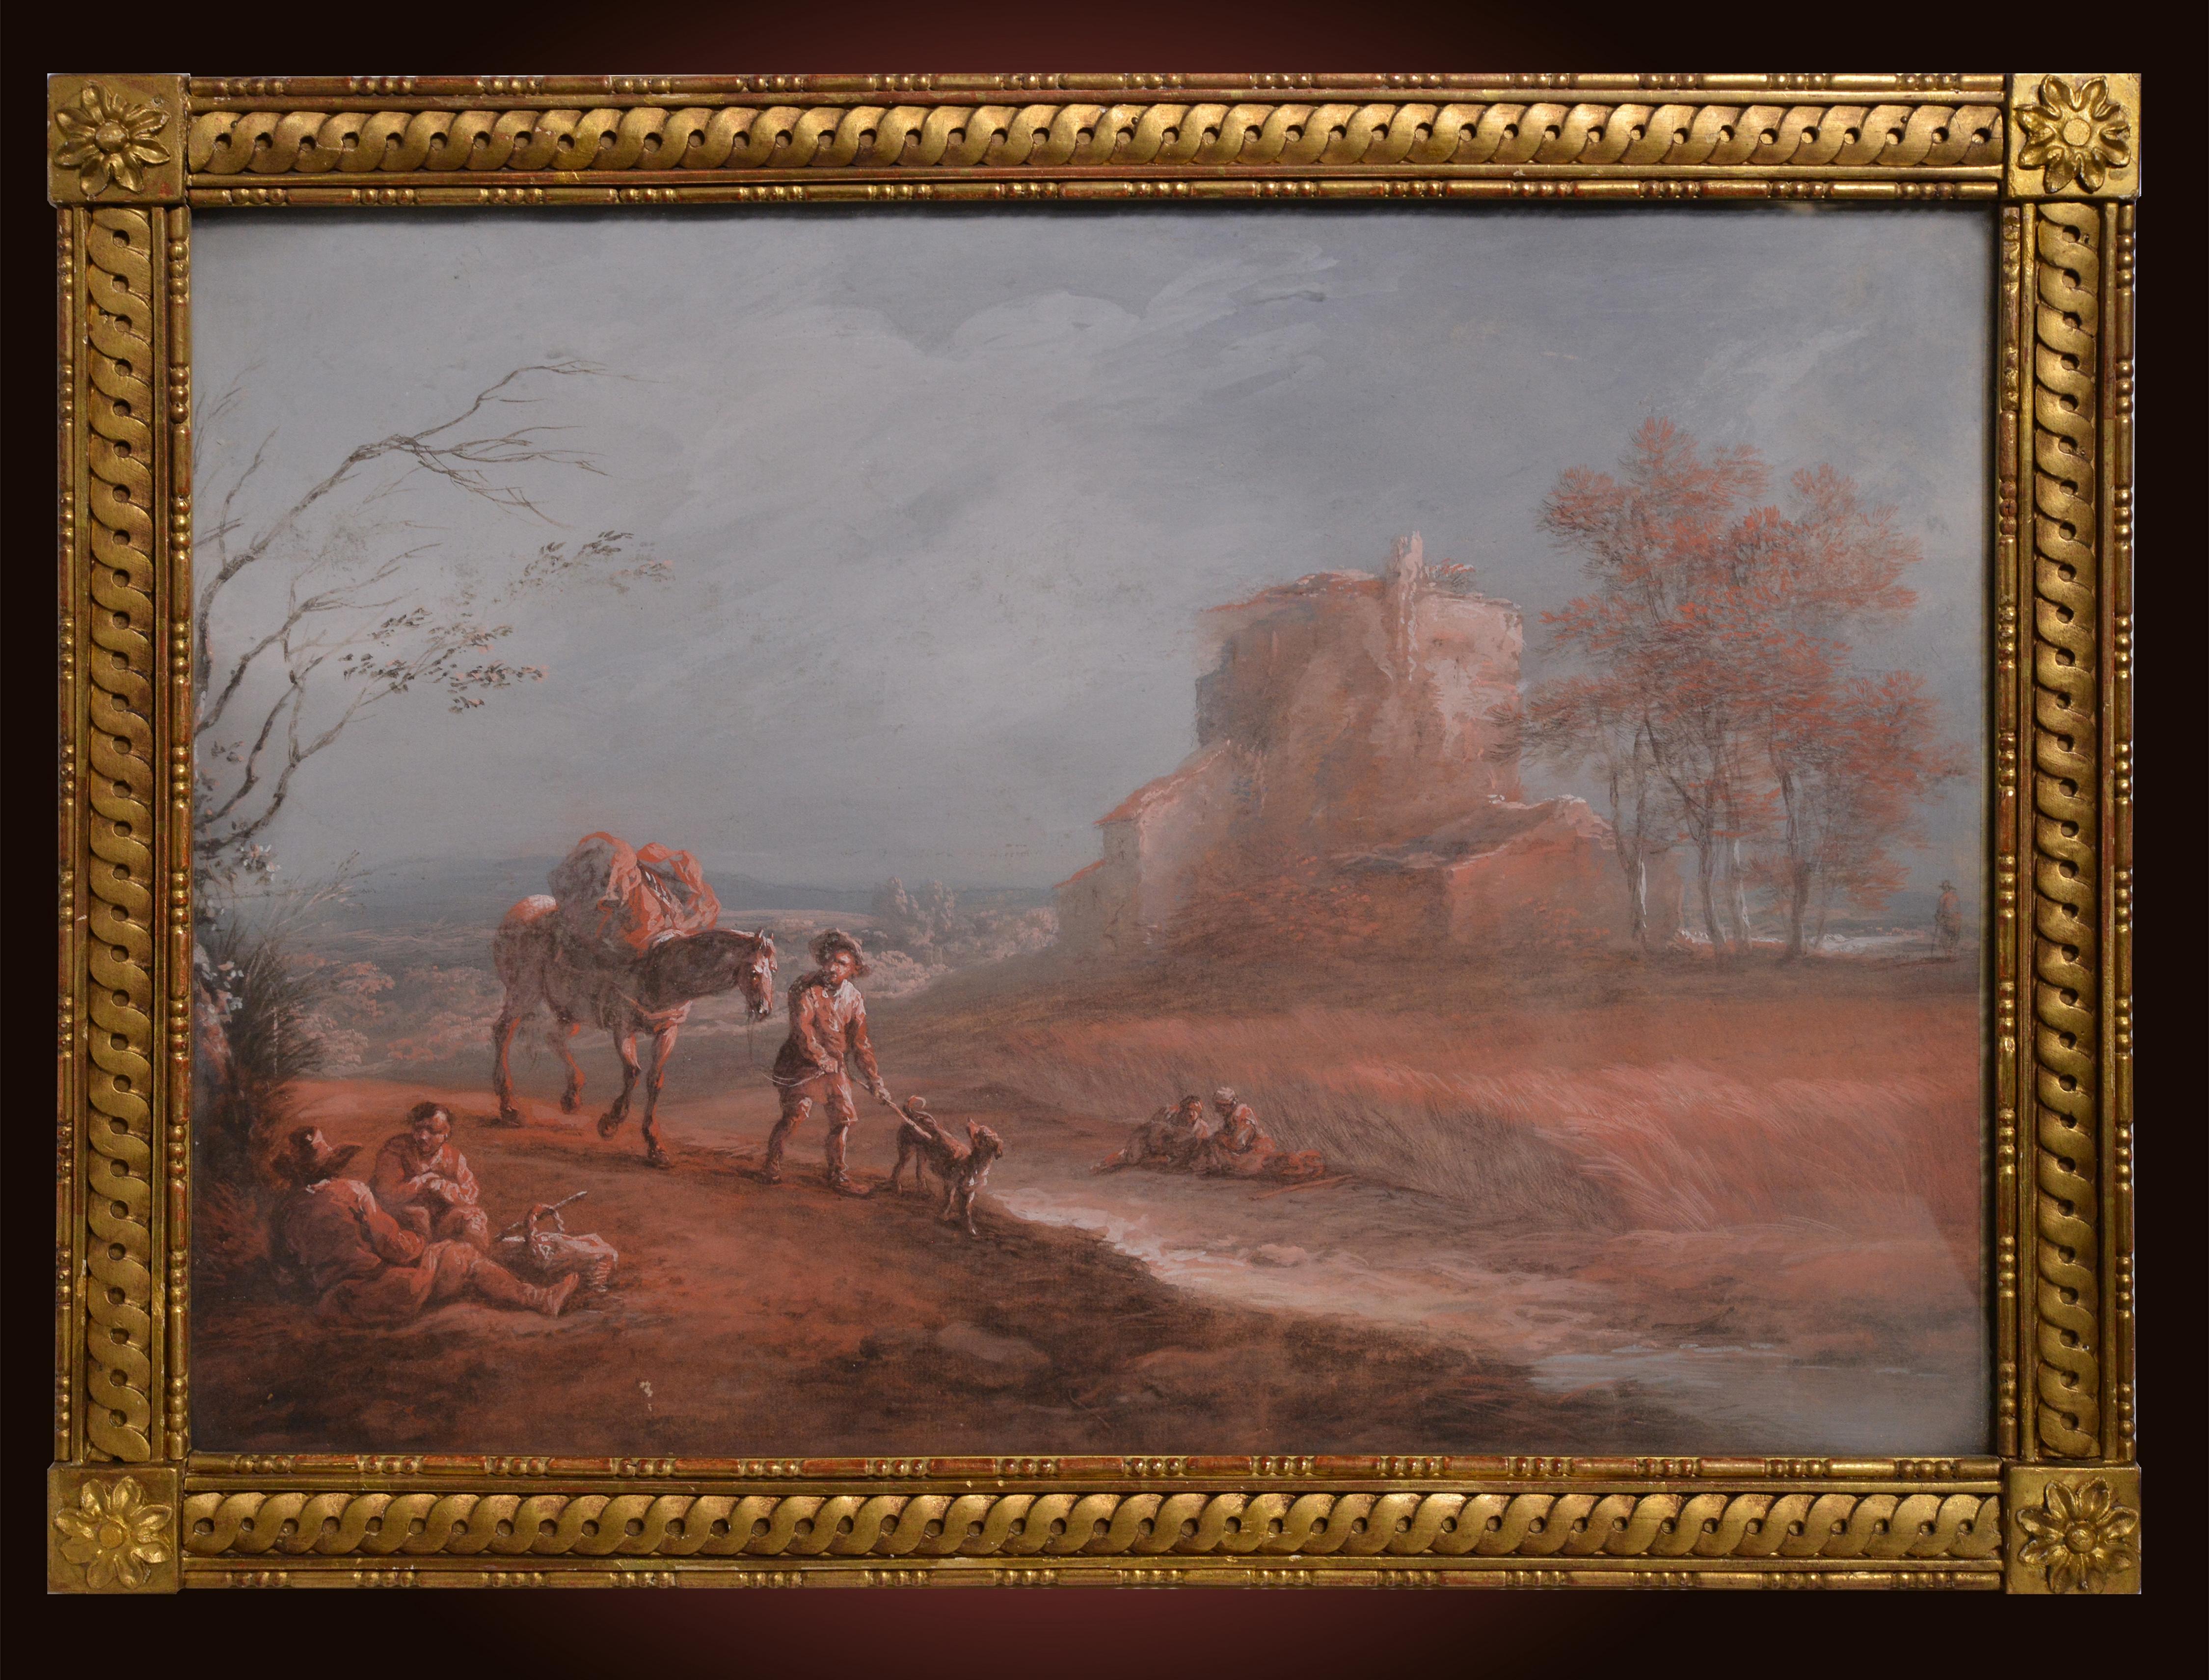 Pair of Grisaille paintings Rustic scenes 18th century French Rococo Master